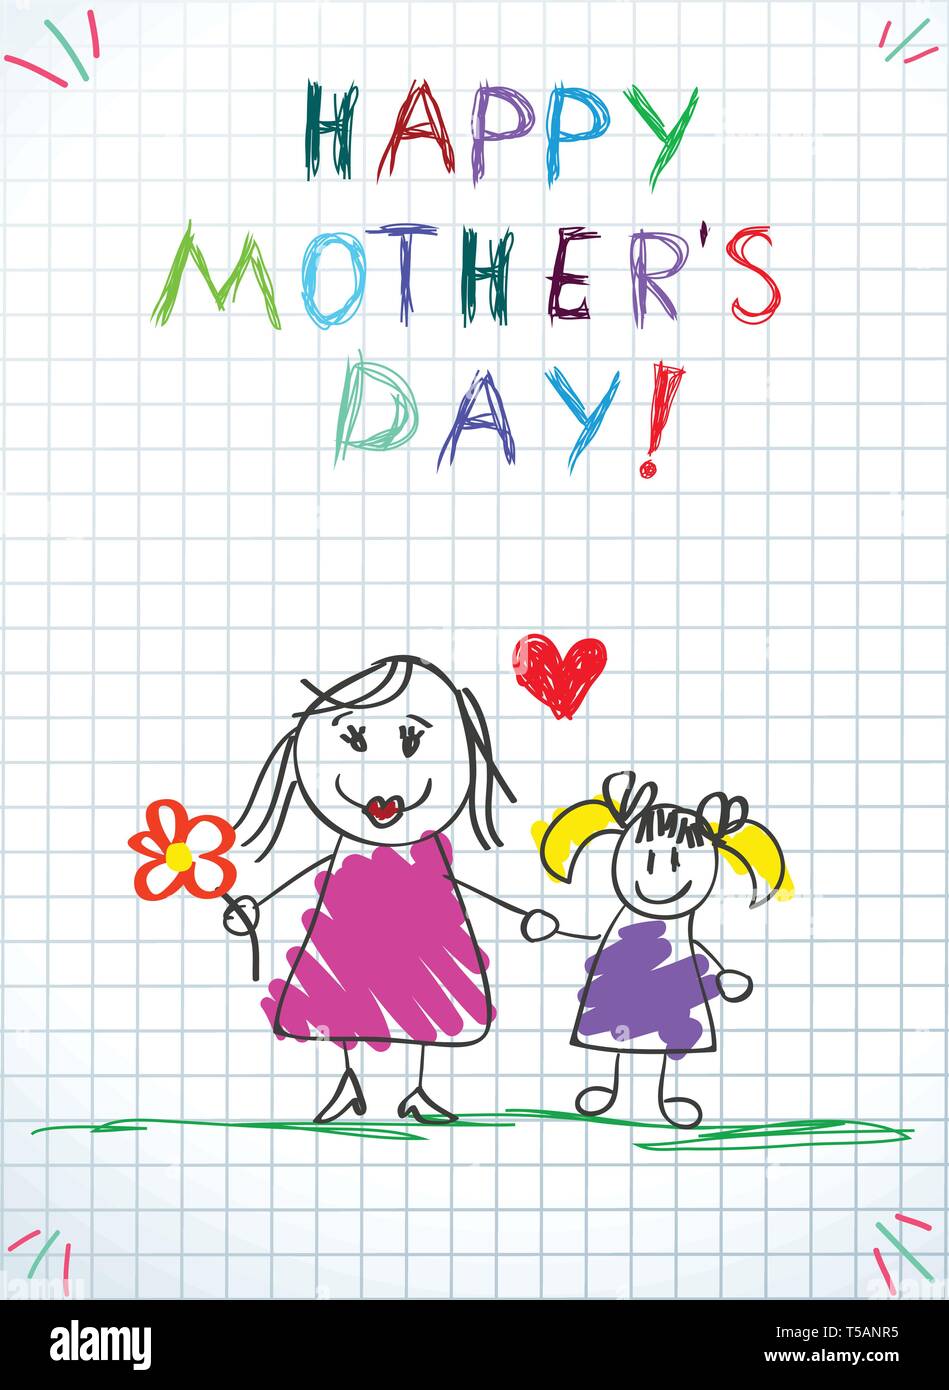 happy mothers day rose drawing - Clip Art Library-saigonsouth.com.vn